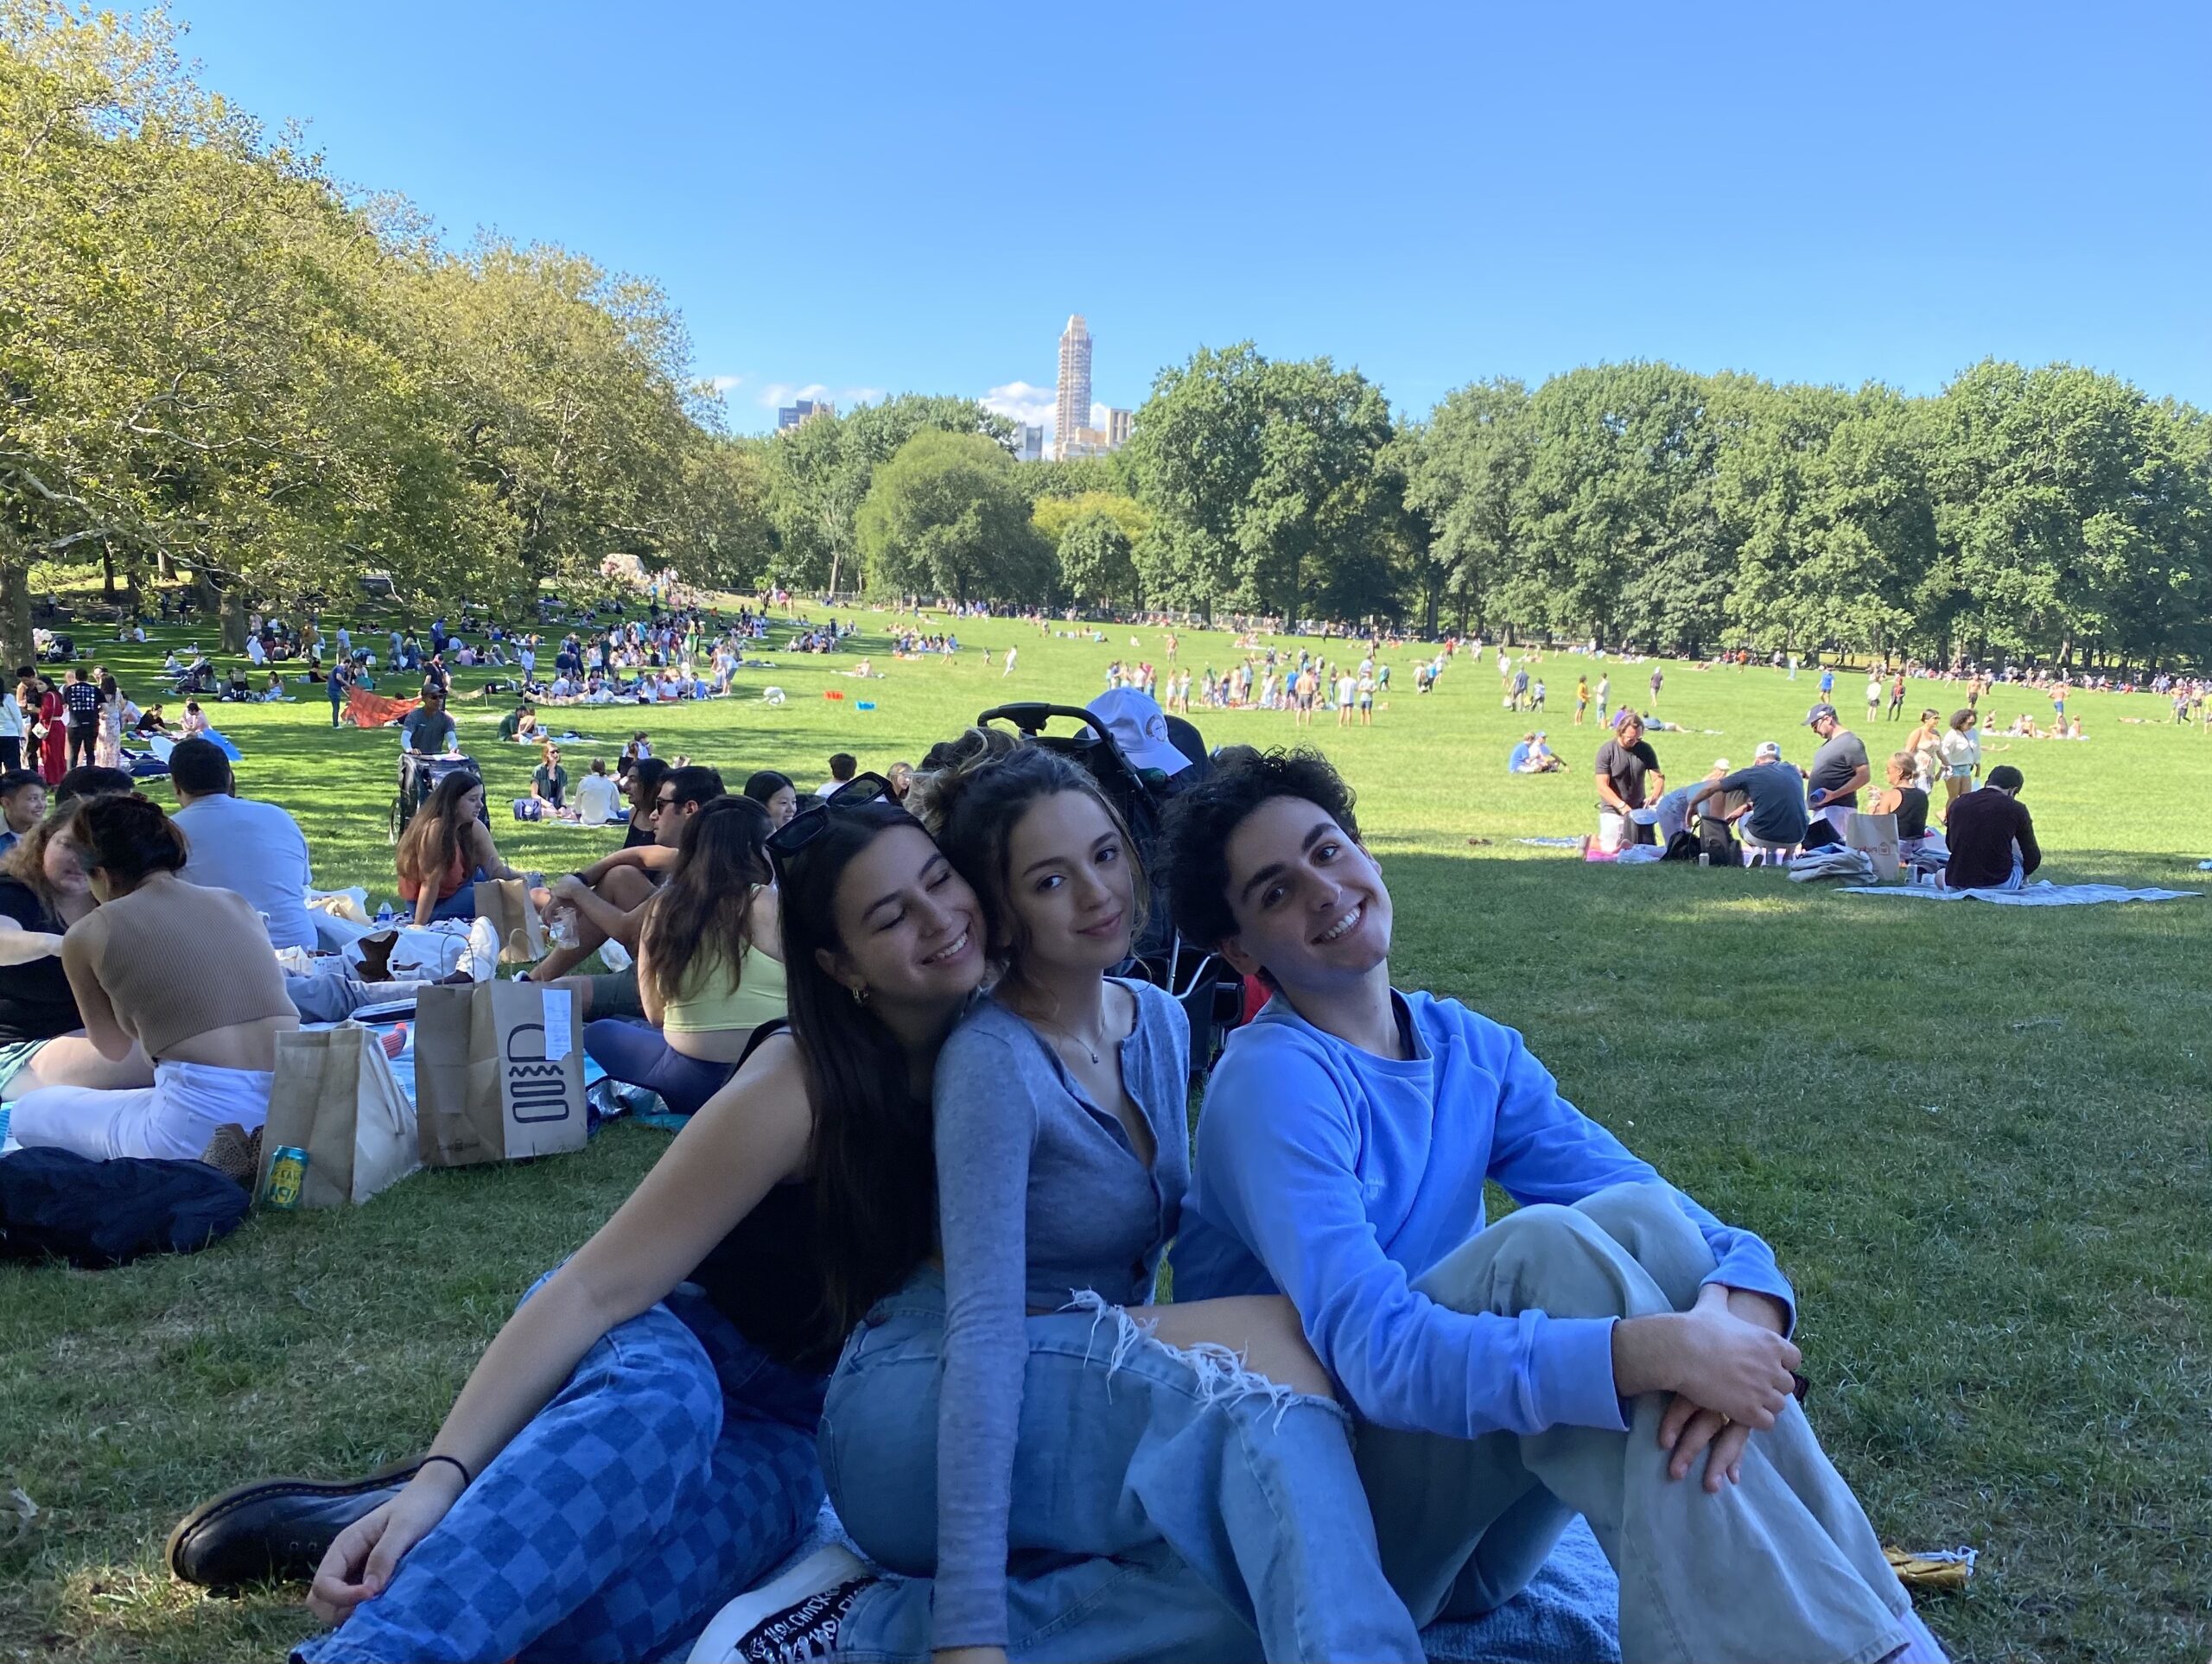 Me and some of my friends sitting with each other at a Central Park picnic